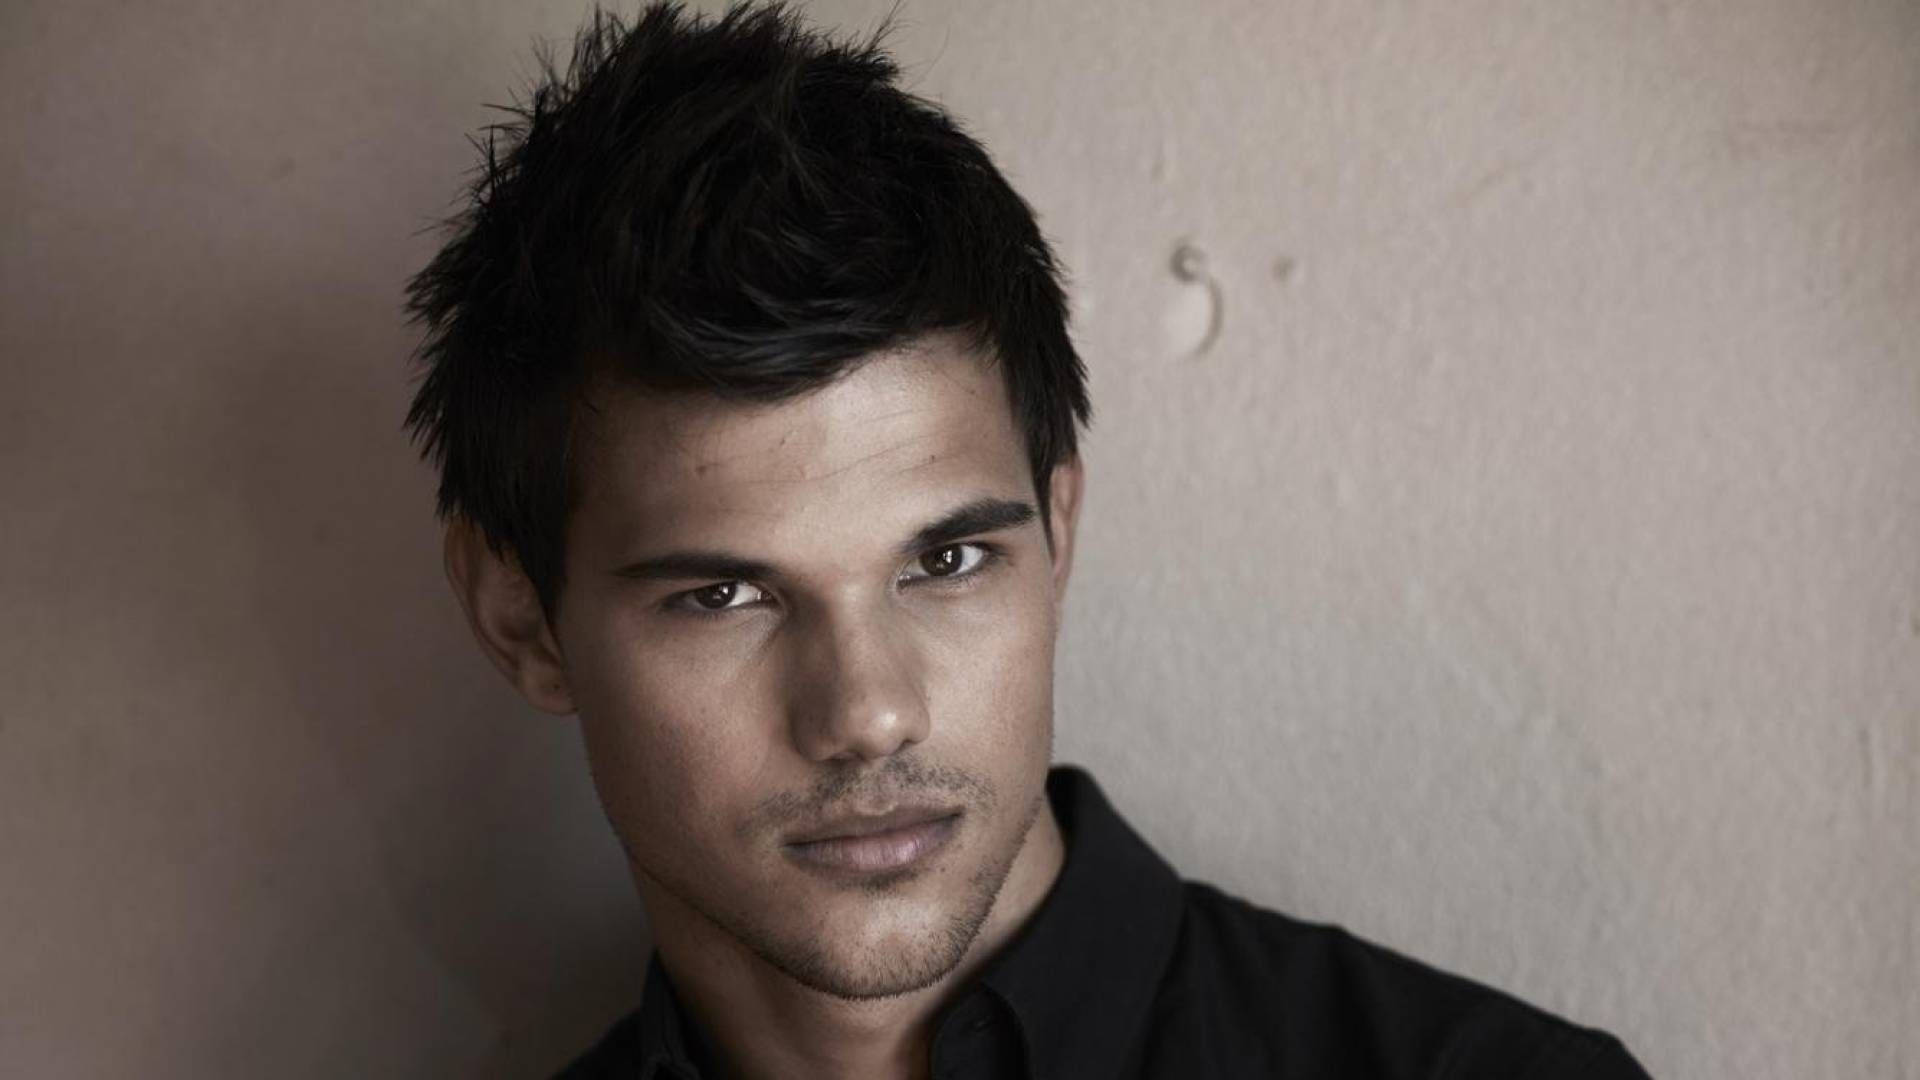 Hollywood Heartthrob Taylor Lautner Showcasing An Alluring Look. Background